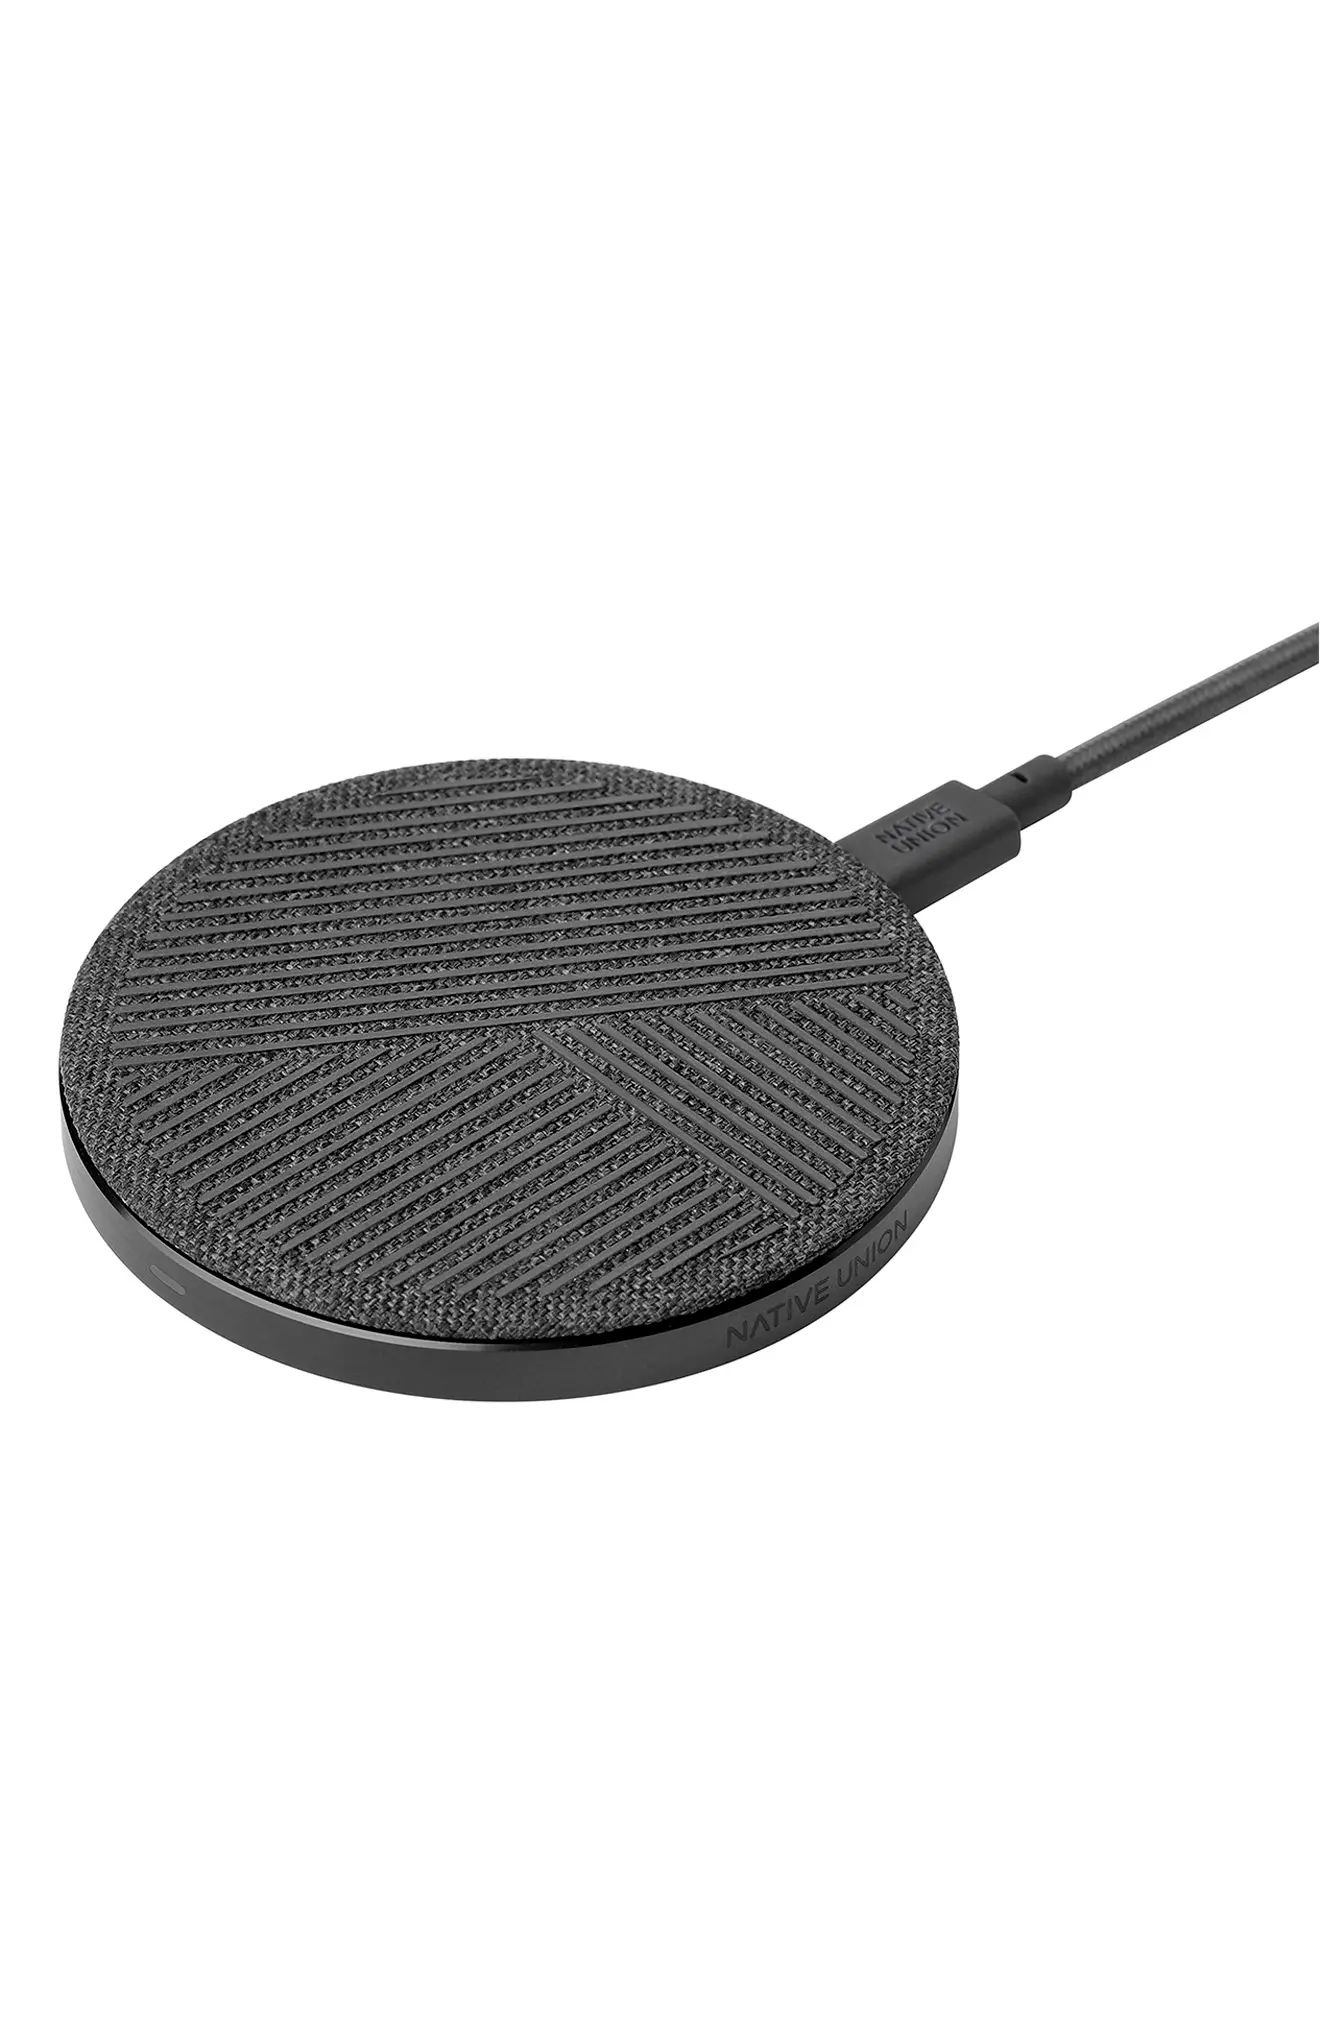 Native Union Drop Wireless Charging Pad, Size One Size - Black | Nordstrom